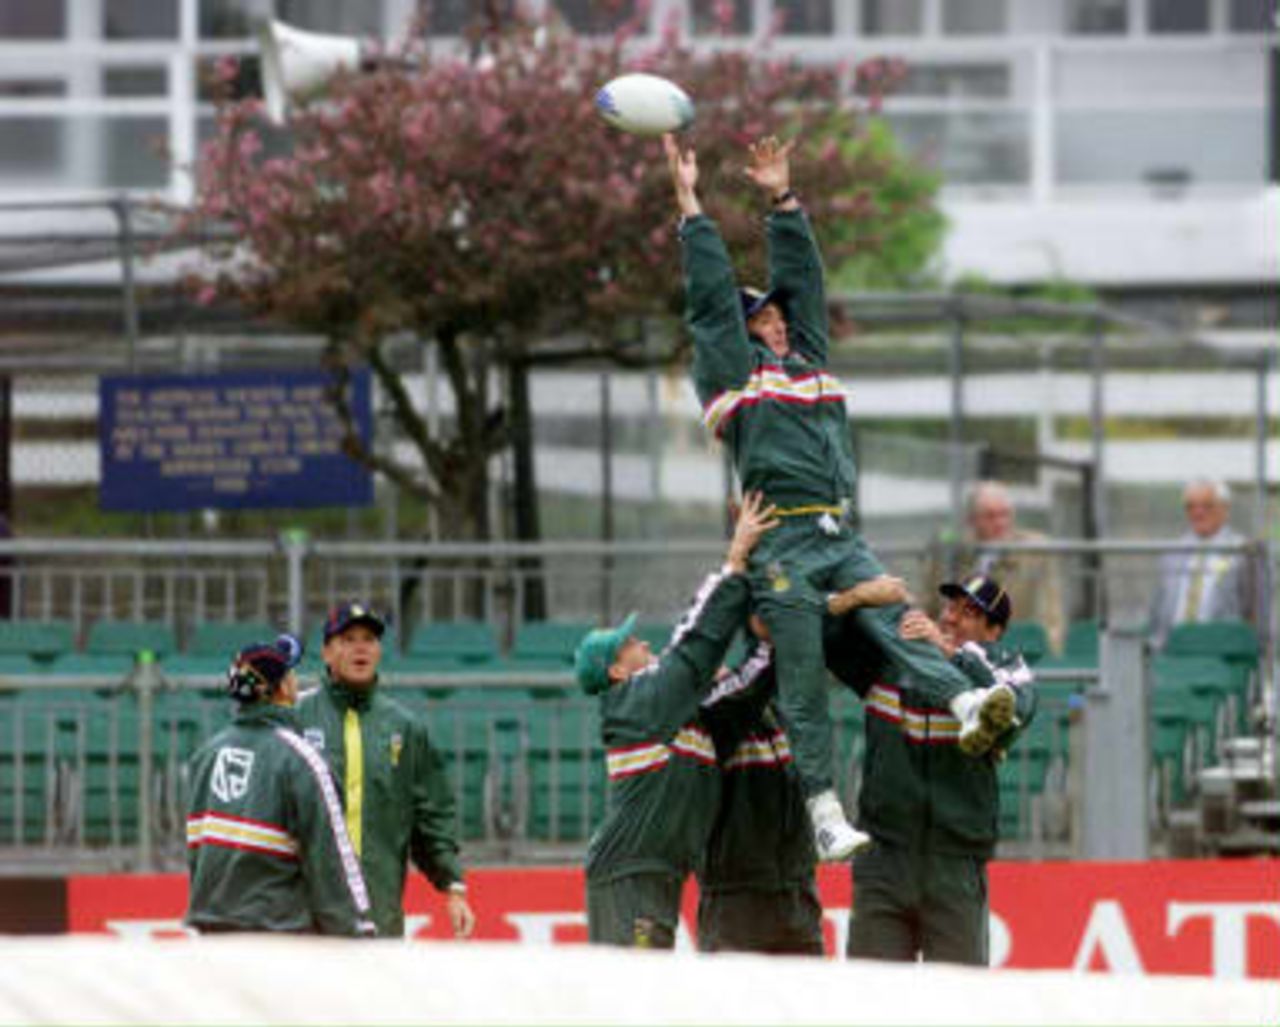 Alan Dawson gets a lift from team mates as they practise their rugby skills - abandoned Sussex - South Africa World Cup warm up match  07 May 1999